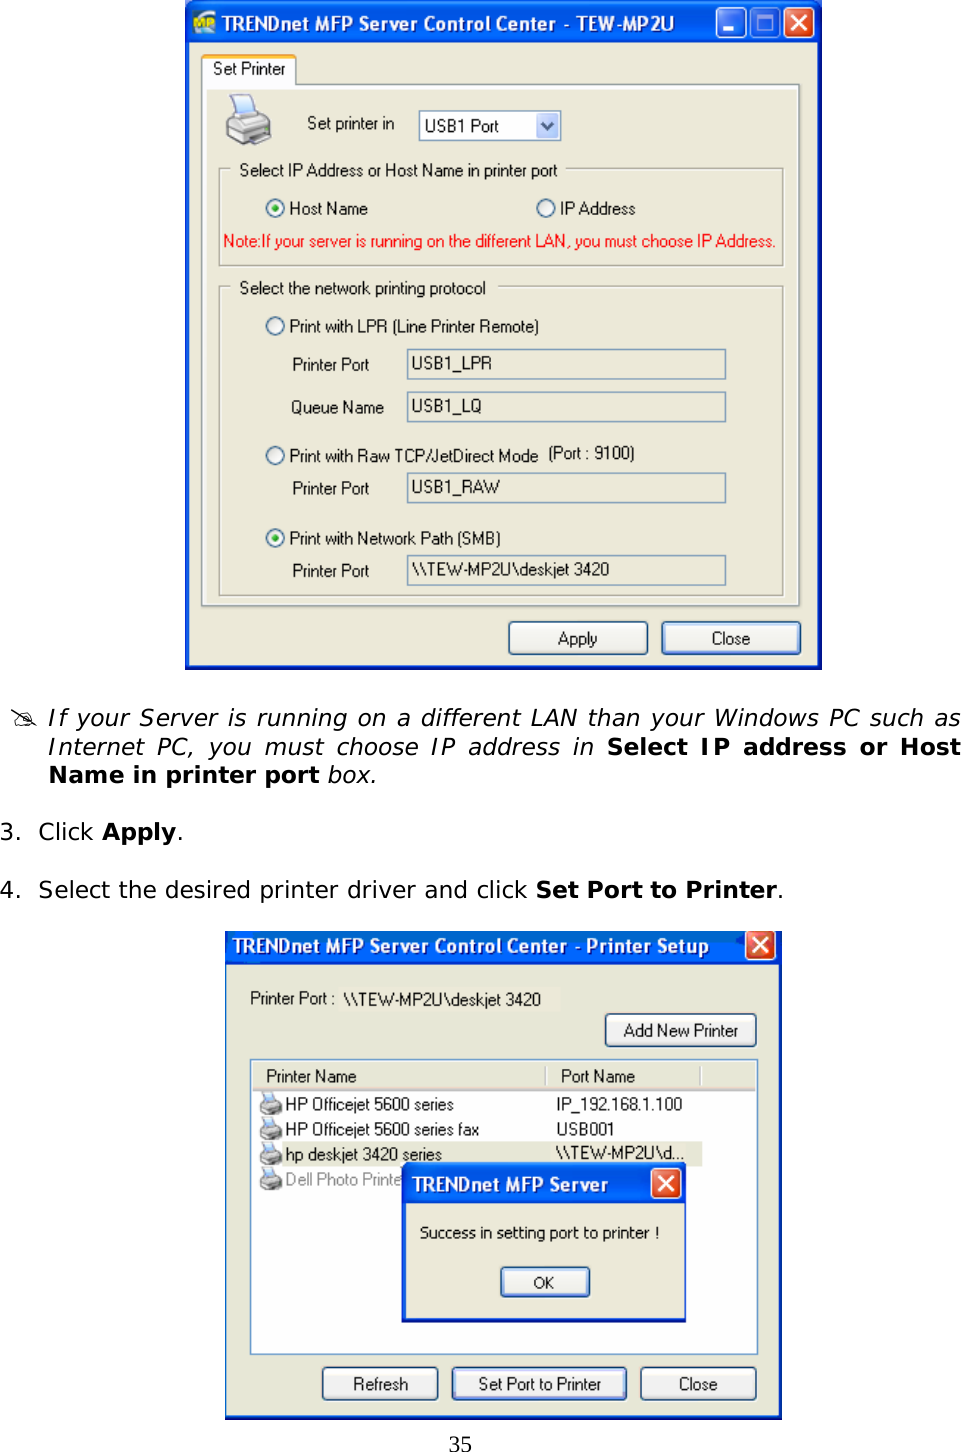     35  # If your Server is running on a different LAN than your Windows PC such as Internet PC, you must choose IP address in Select IP address or Host Name in printer port box.  3. Click Apply.  4. Select the desired printer driver and click Set Port to Printer.   